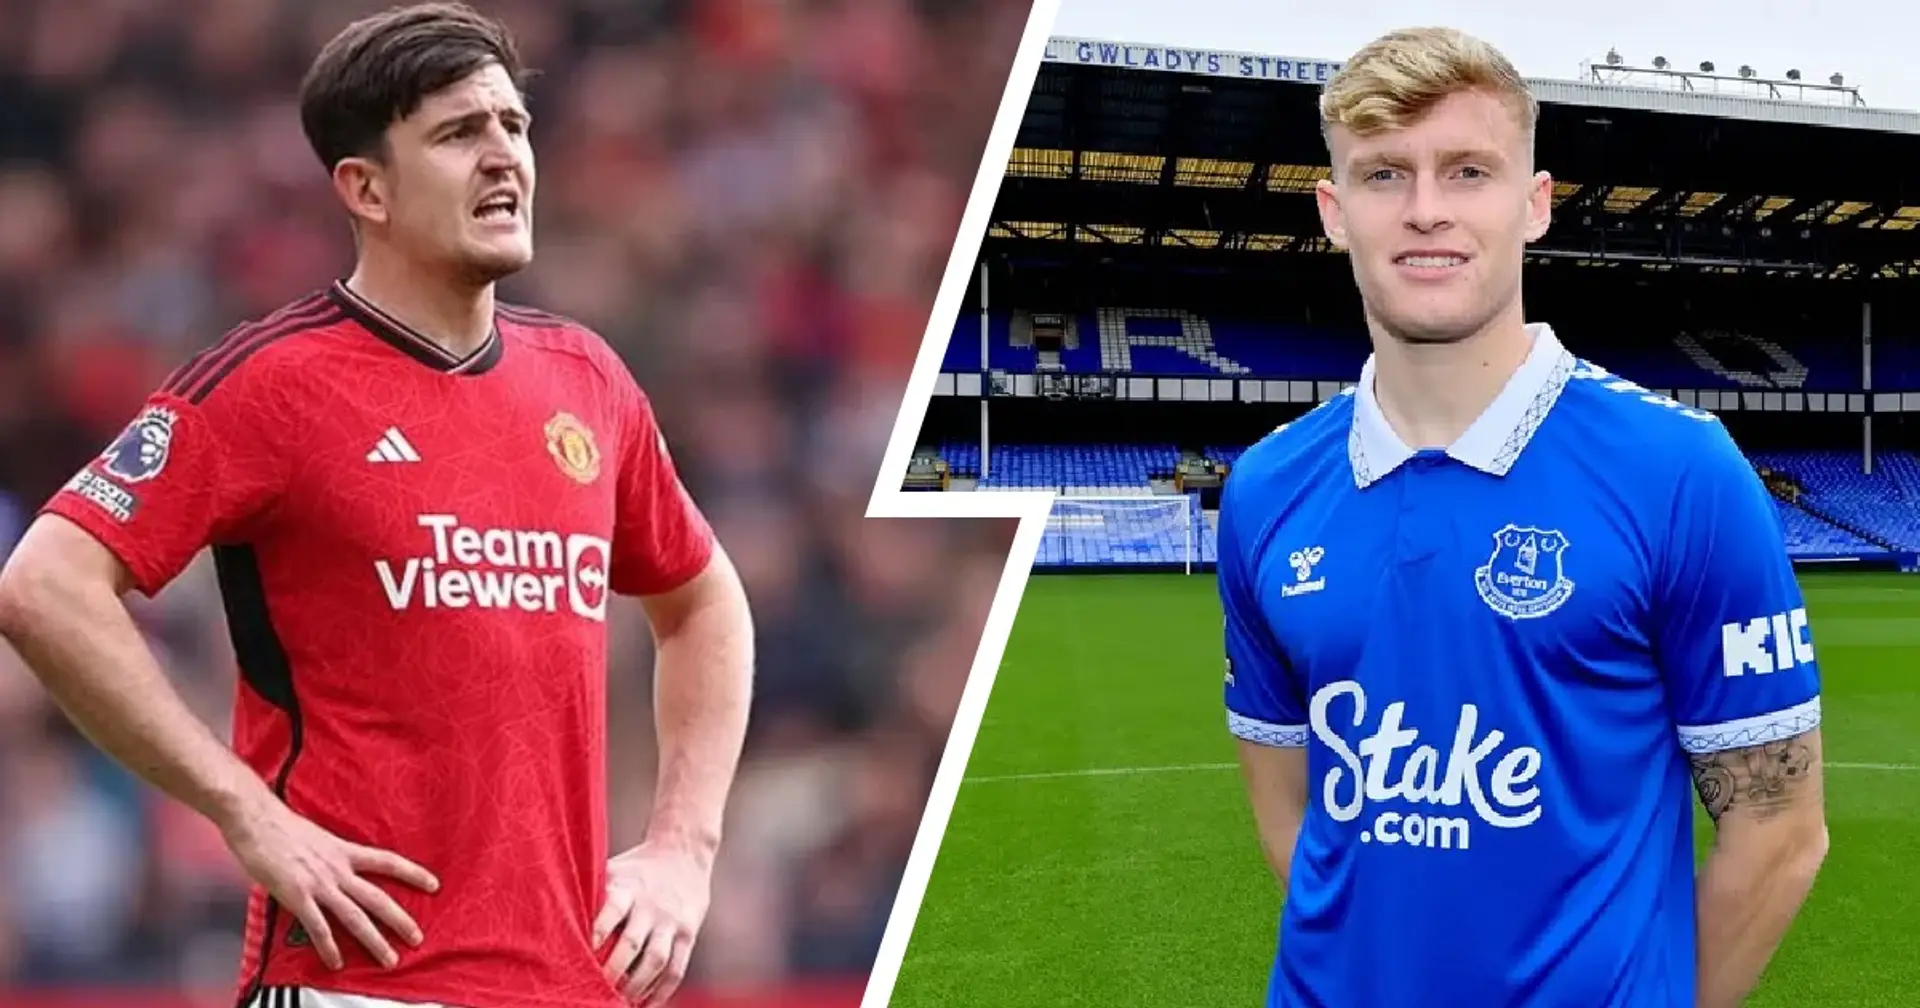 Man United could use Maguire as bait to sign Branthwaite